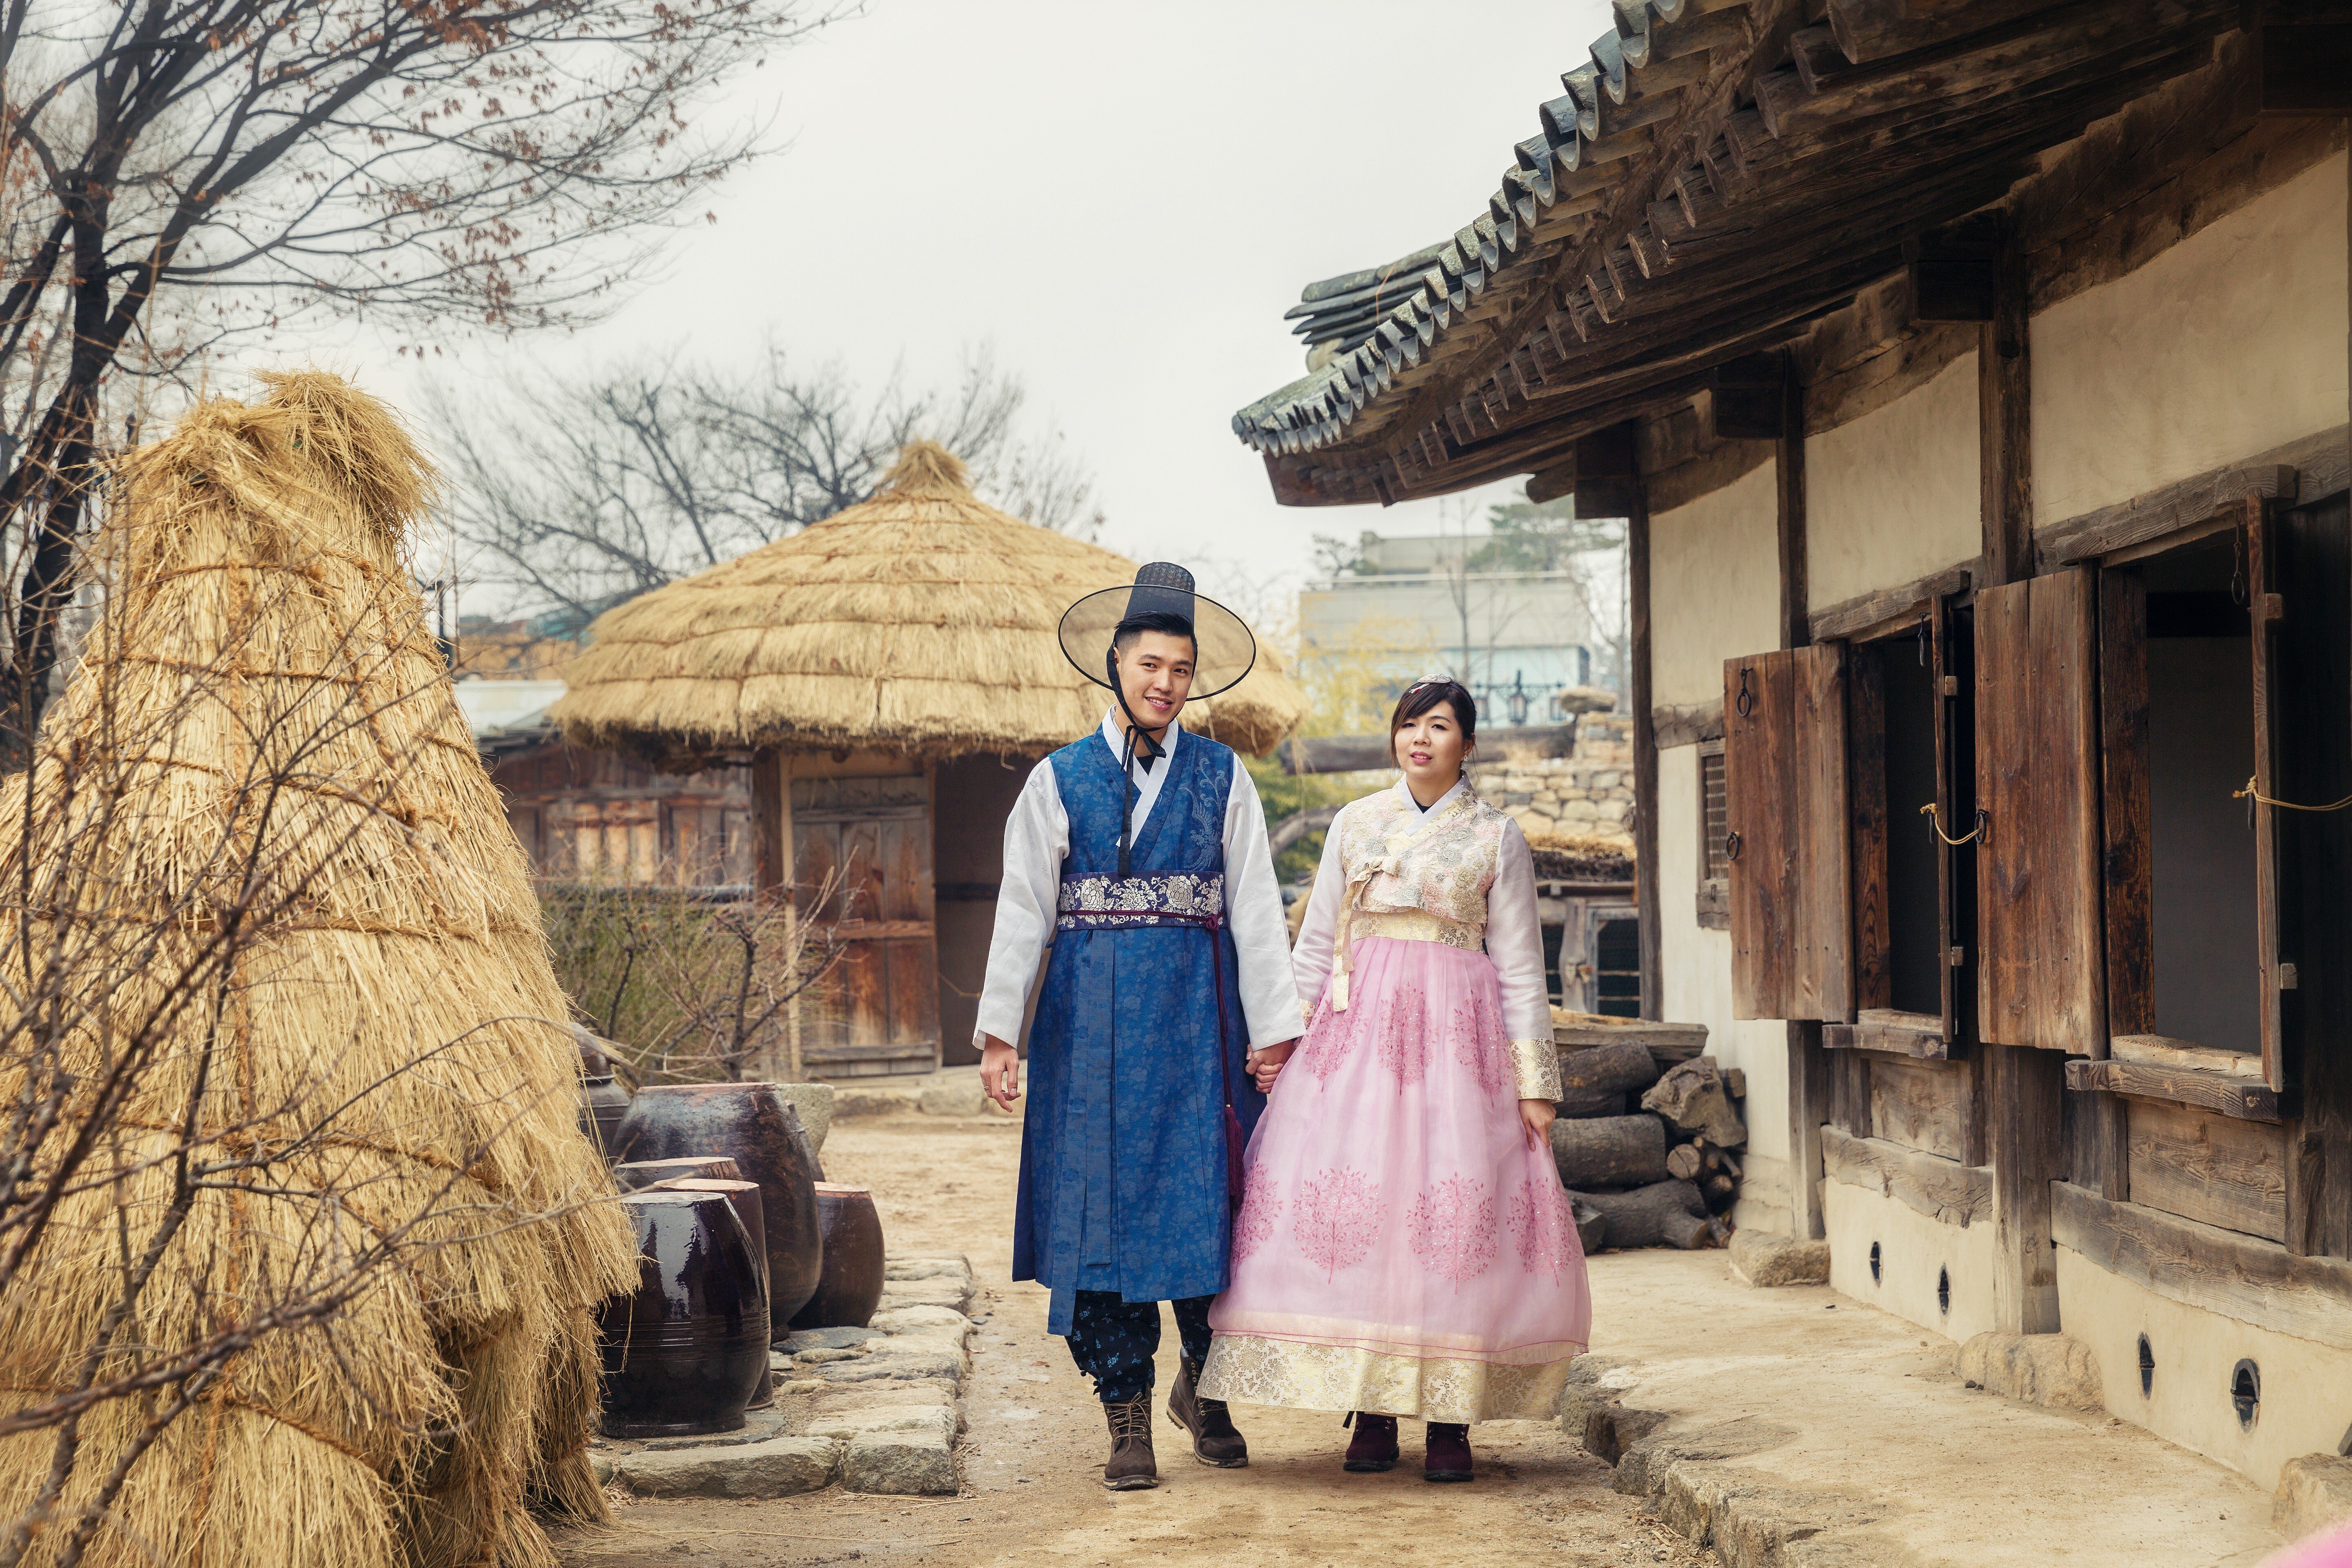 Hanbok Culture Week to promote traditional dress nationwide through Sunday